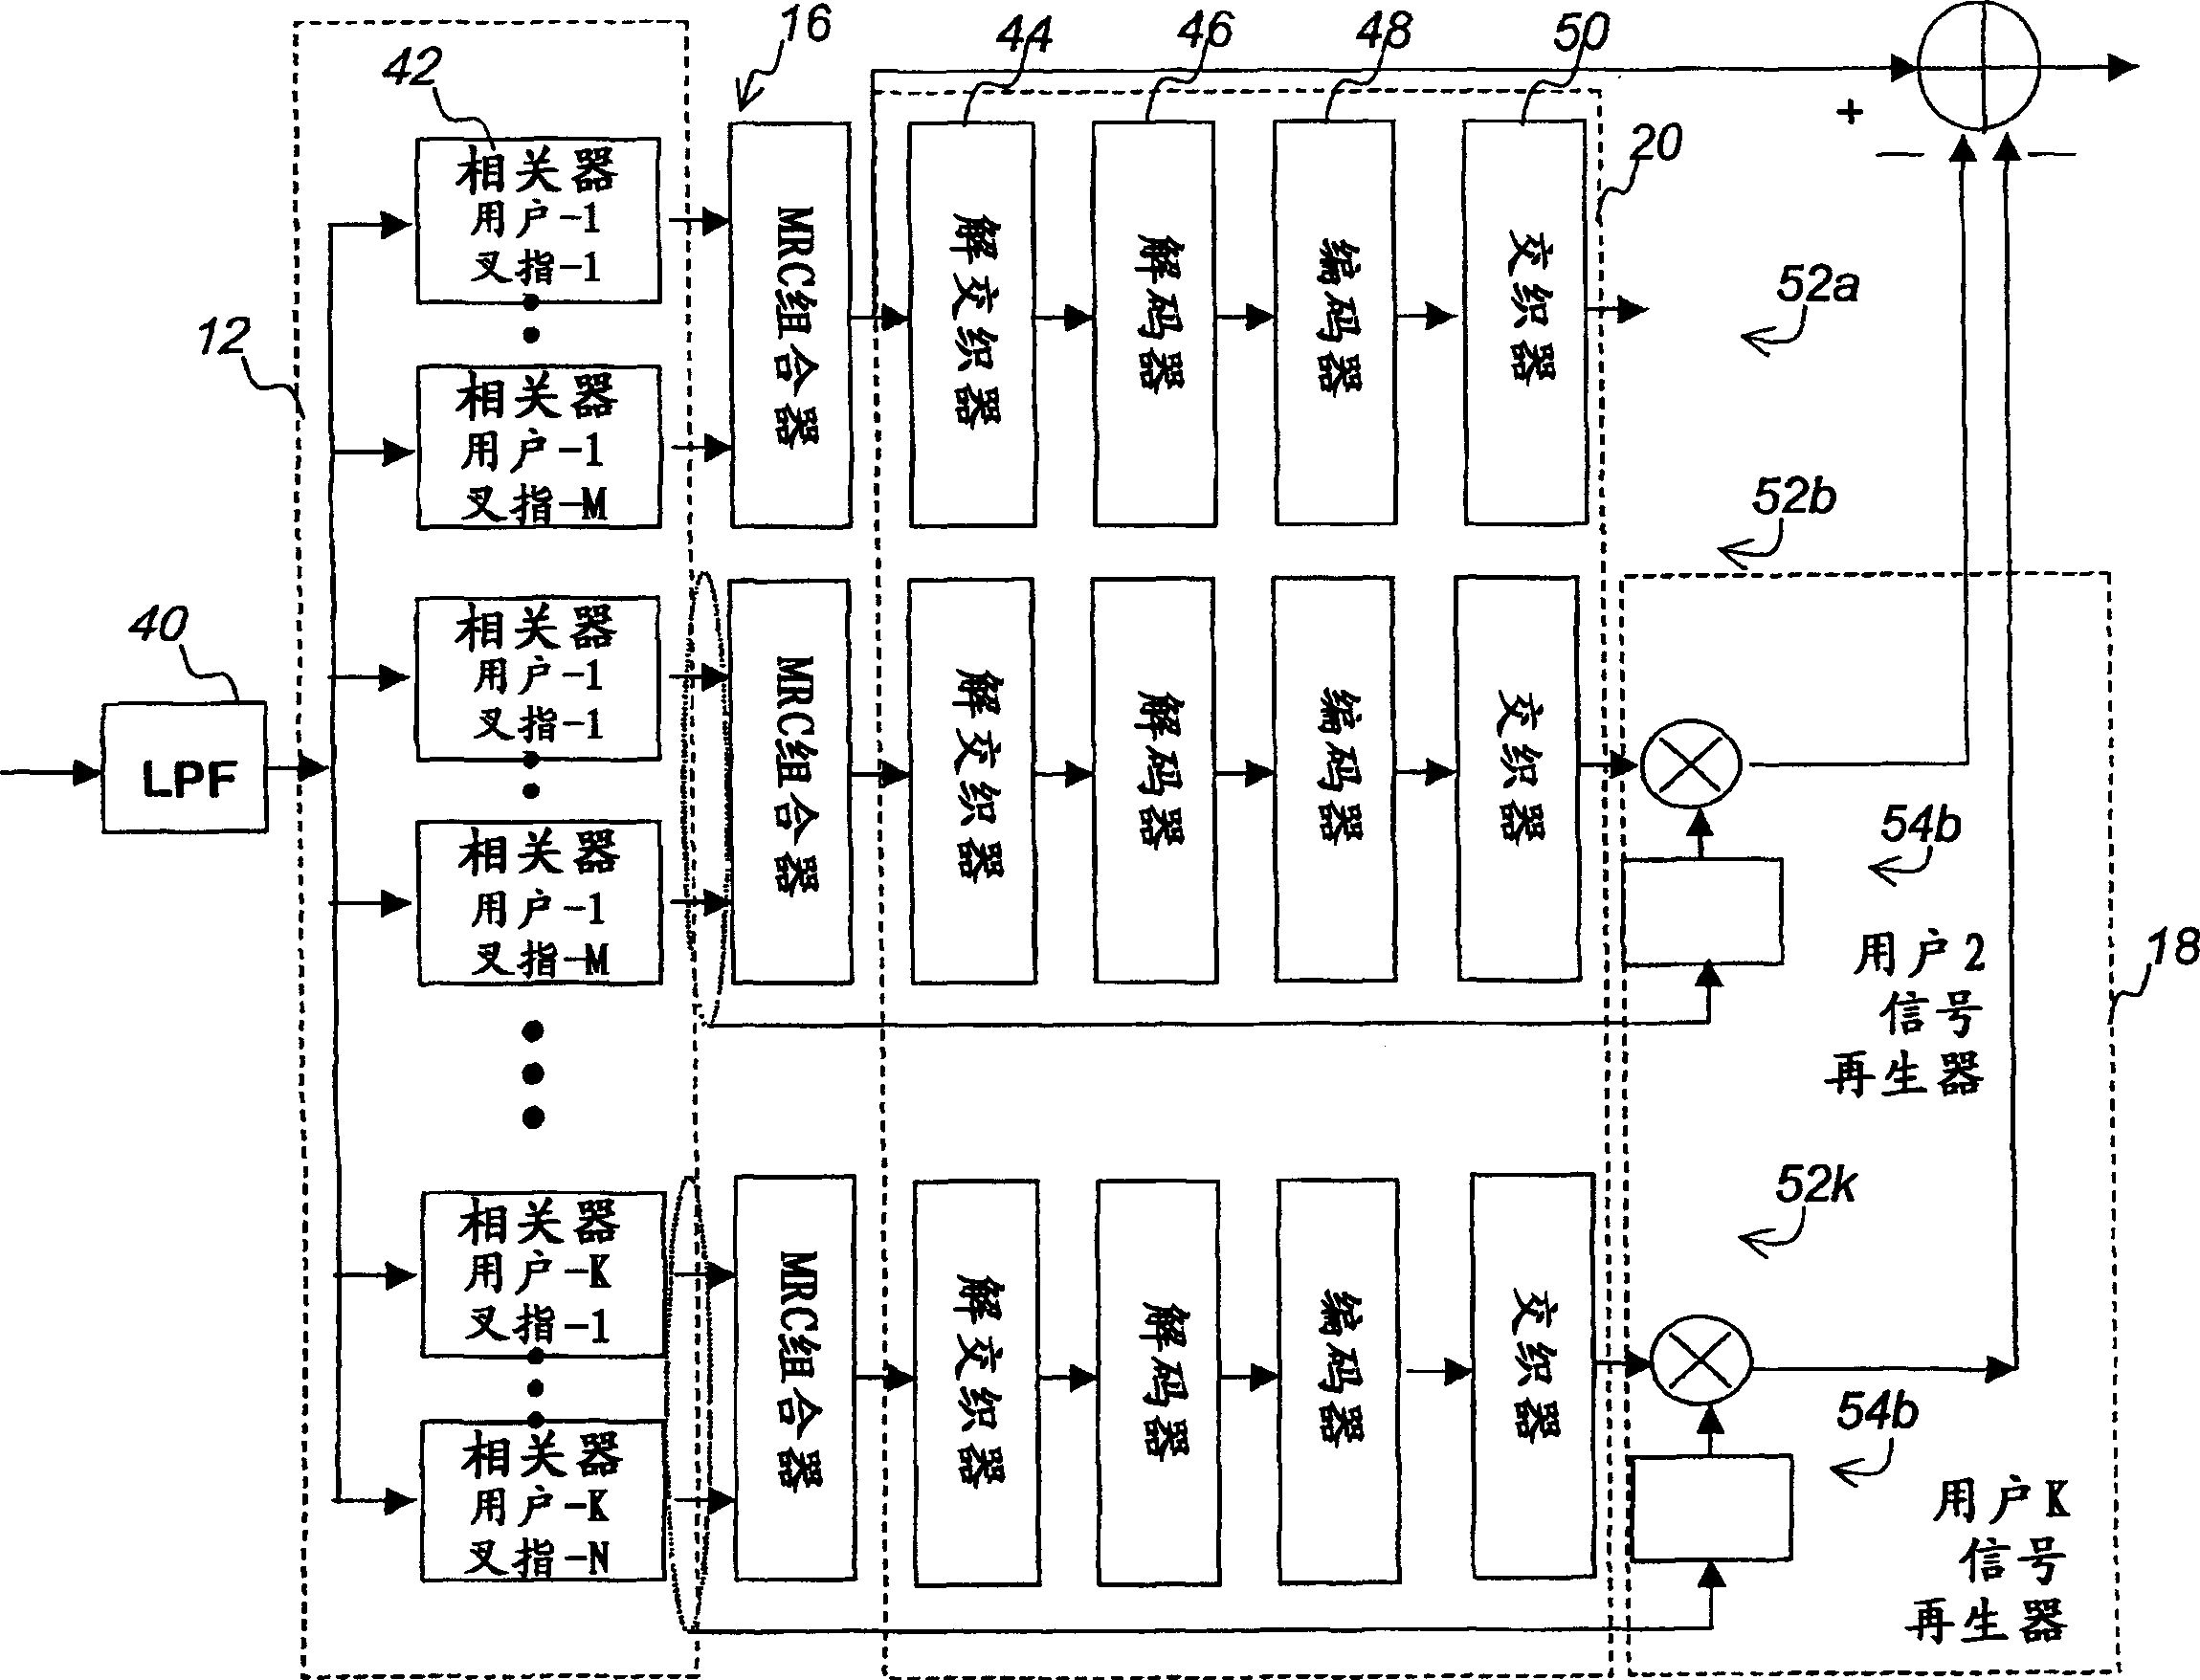 Multi-user detector for direct sequence-code division multiple access (DS/CDMA) channels